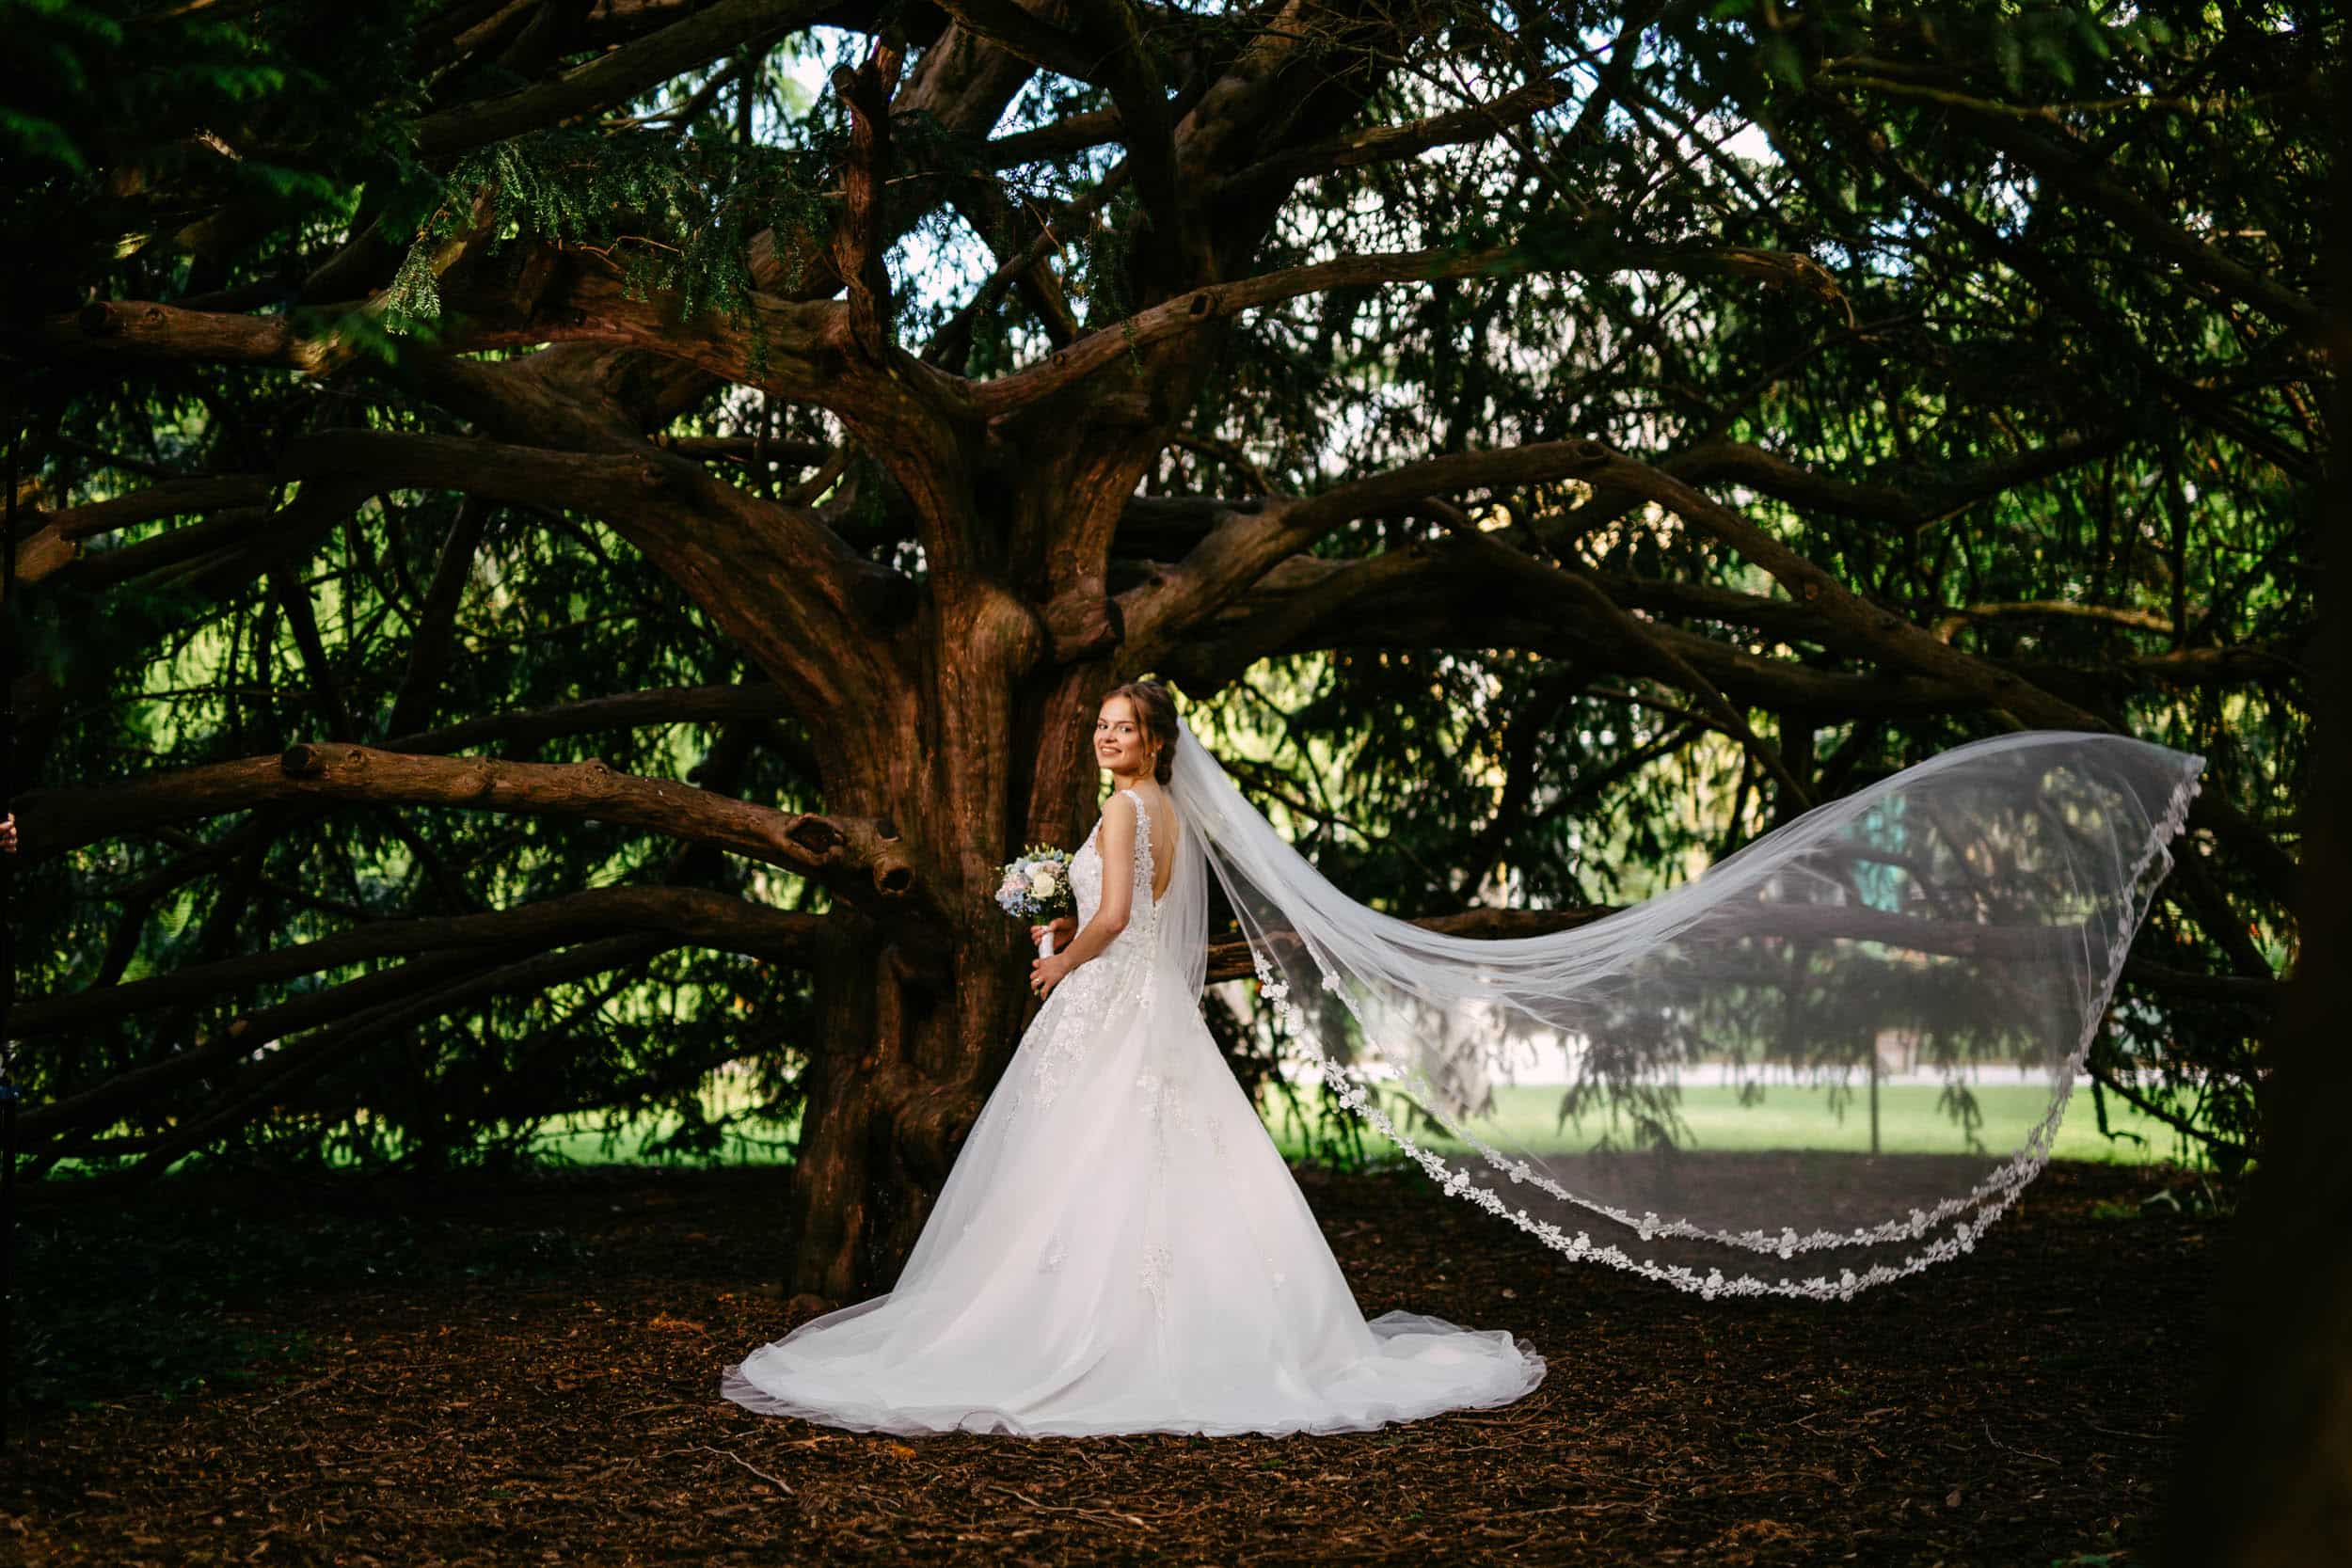 A bride poses with her veil in front of a tree at the Wedding Botanical Garden Delft.